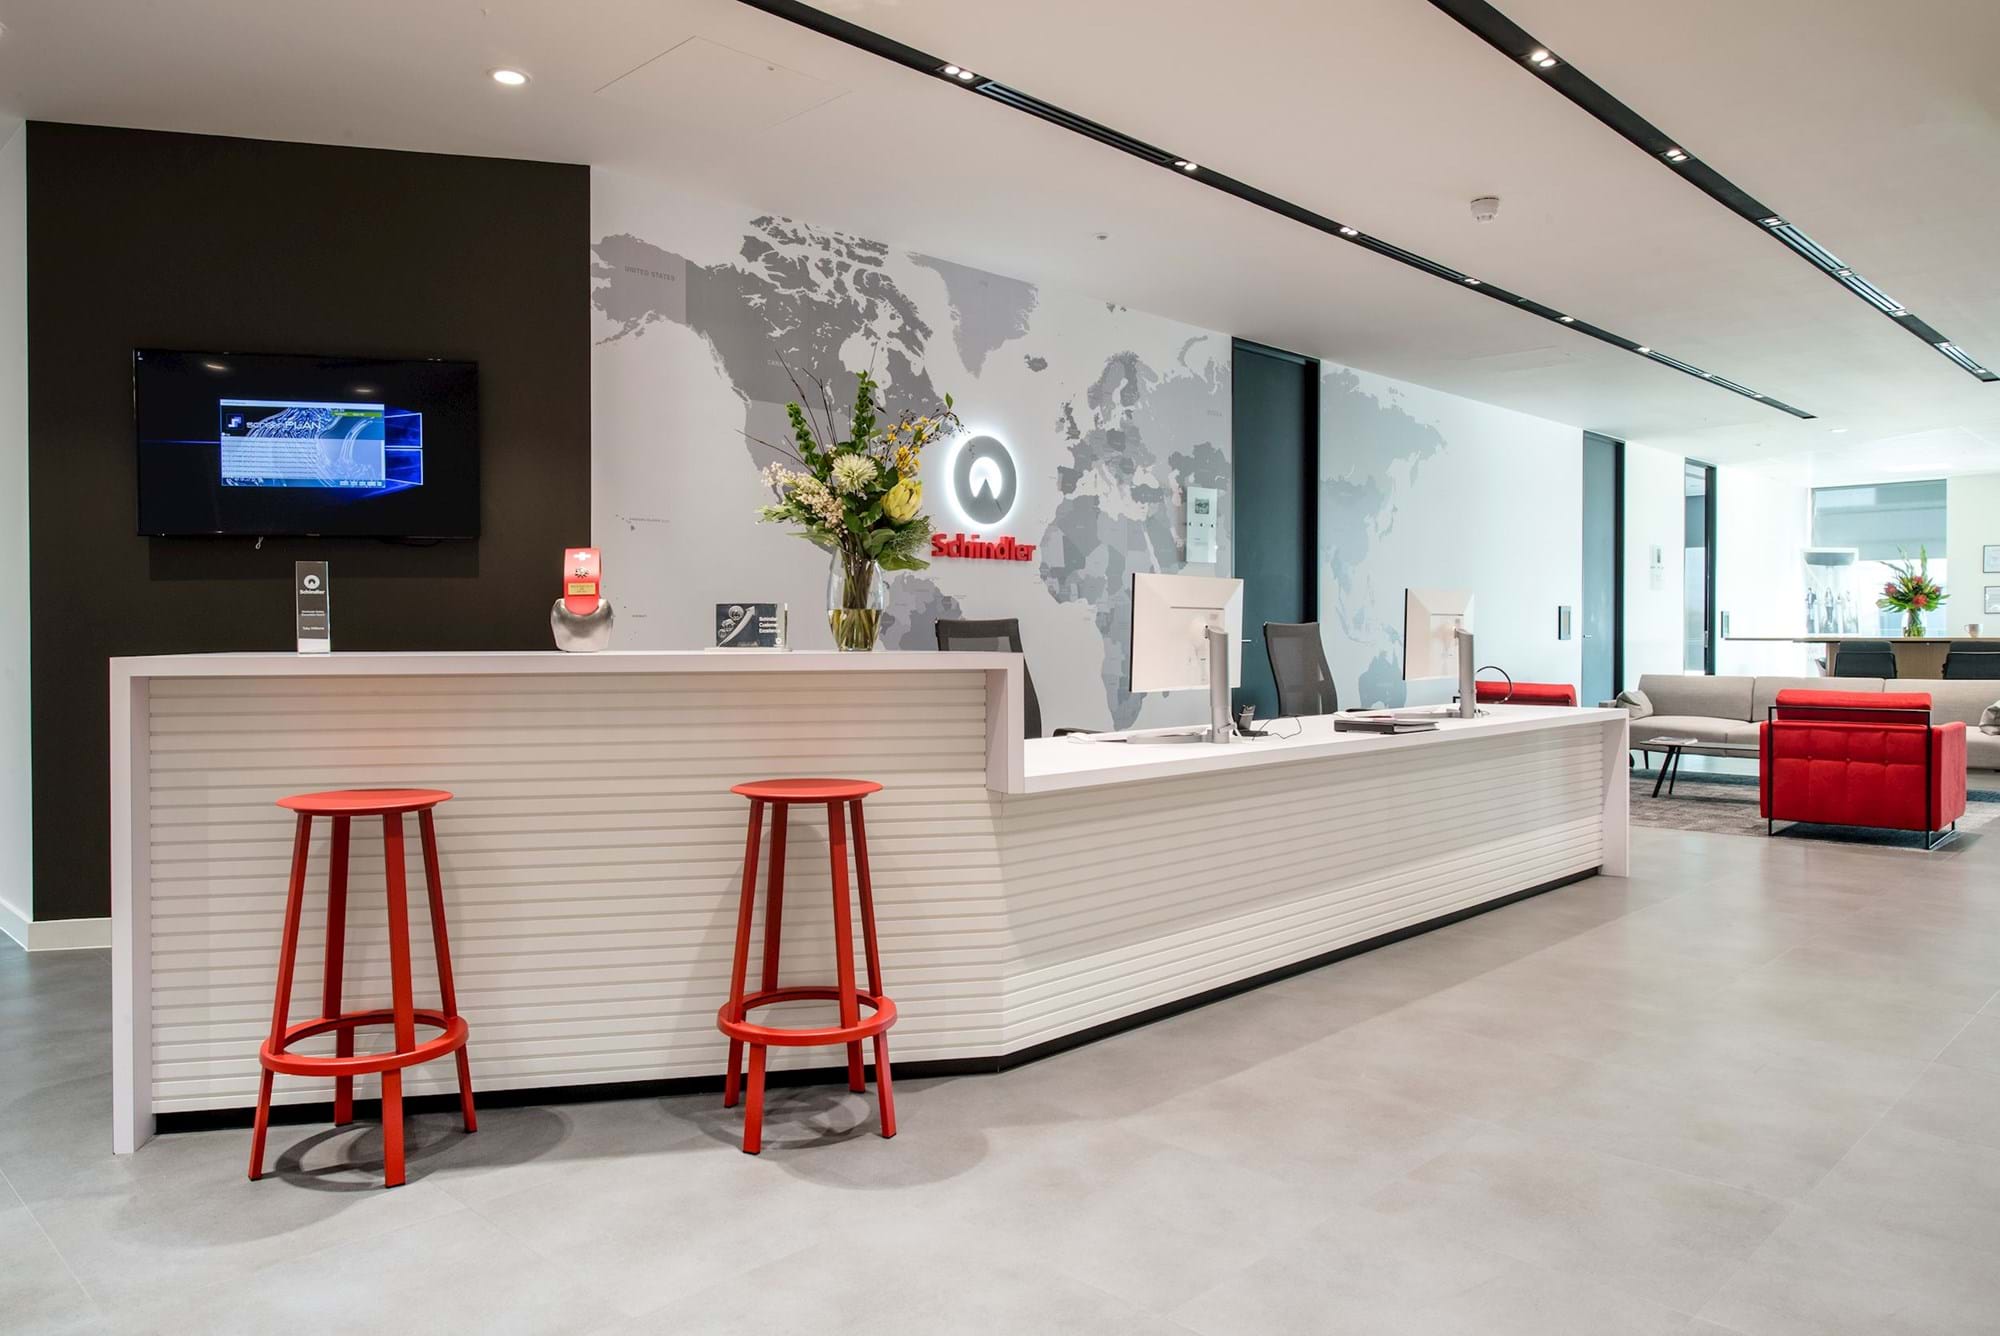 Modus Workspace office design, fit out and refurbishment - Schindlers Lifts - Modus-Schindler-LTD-7.jpg